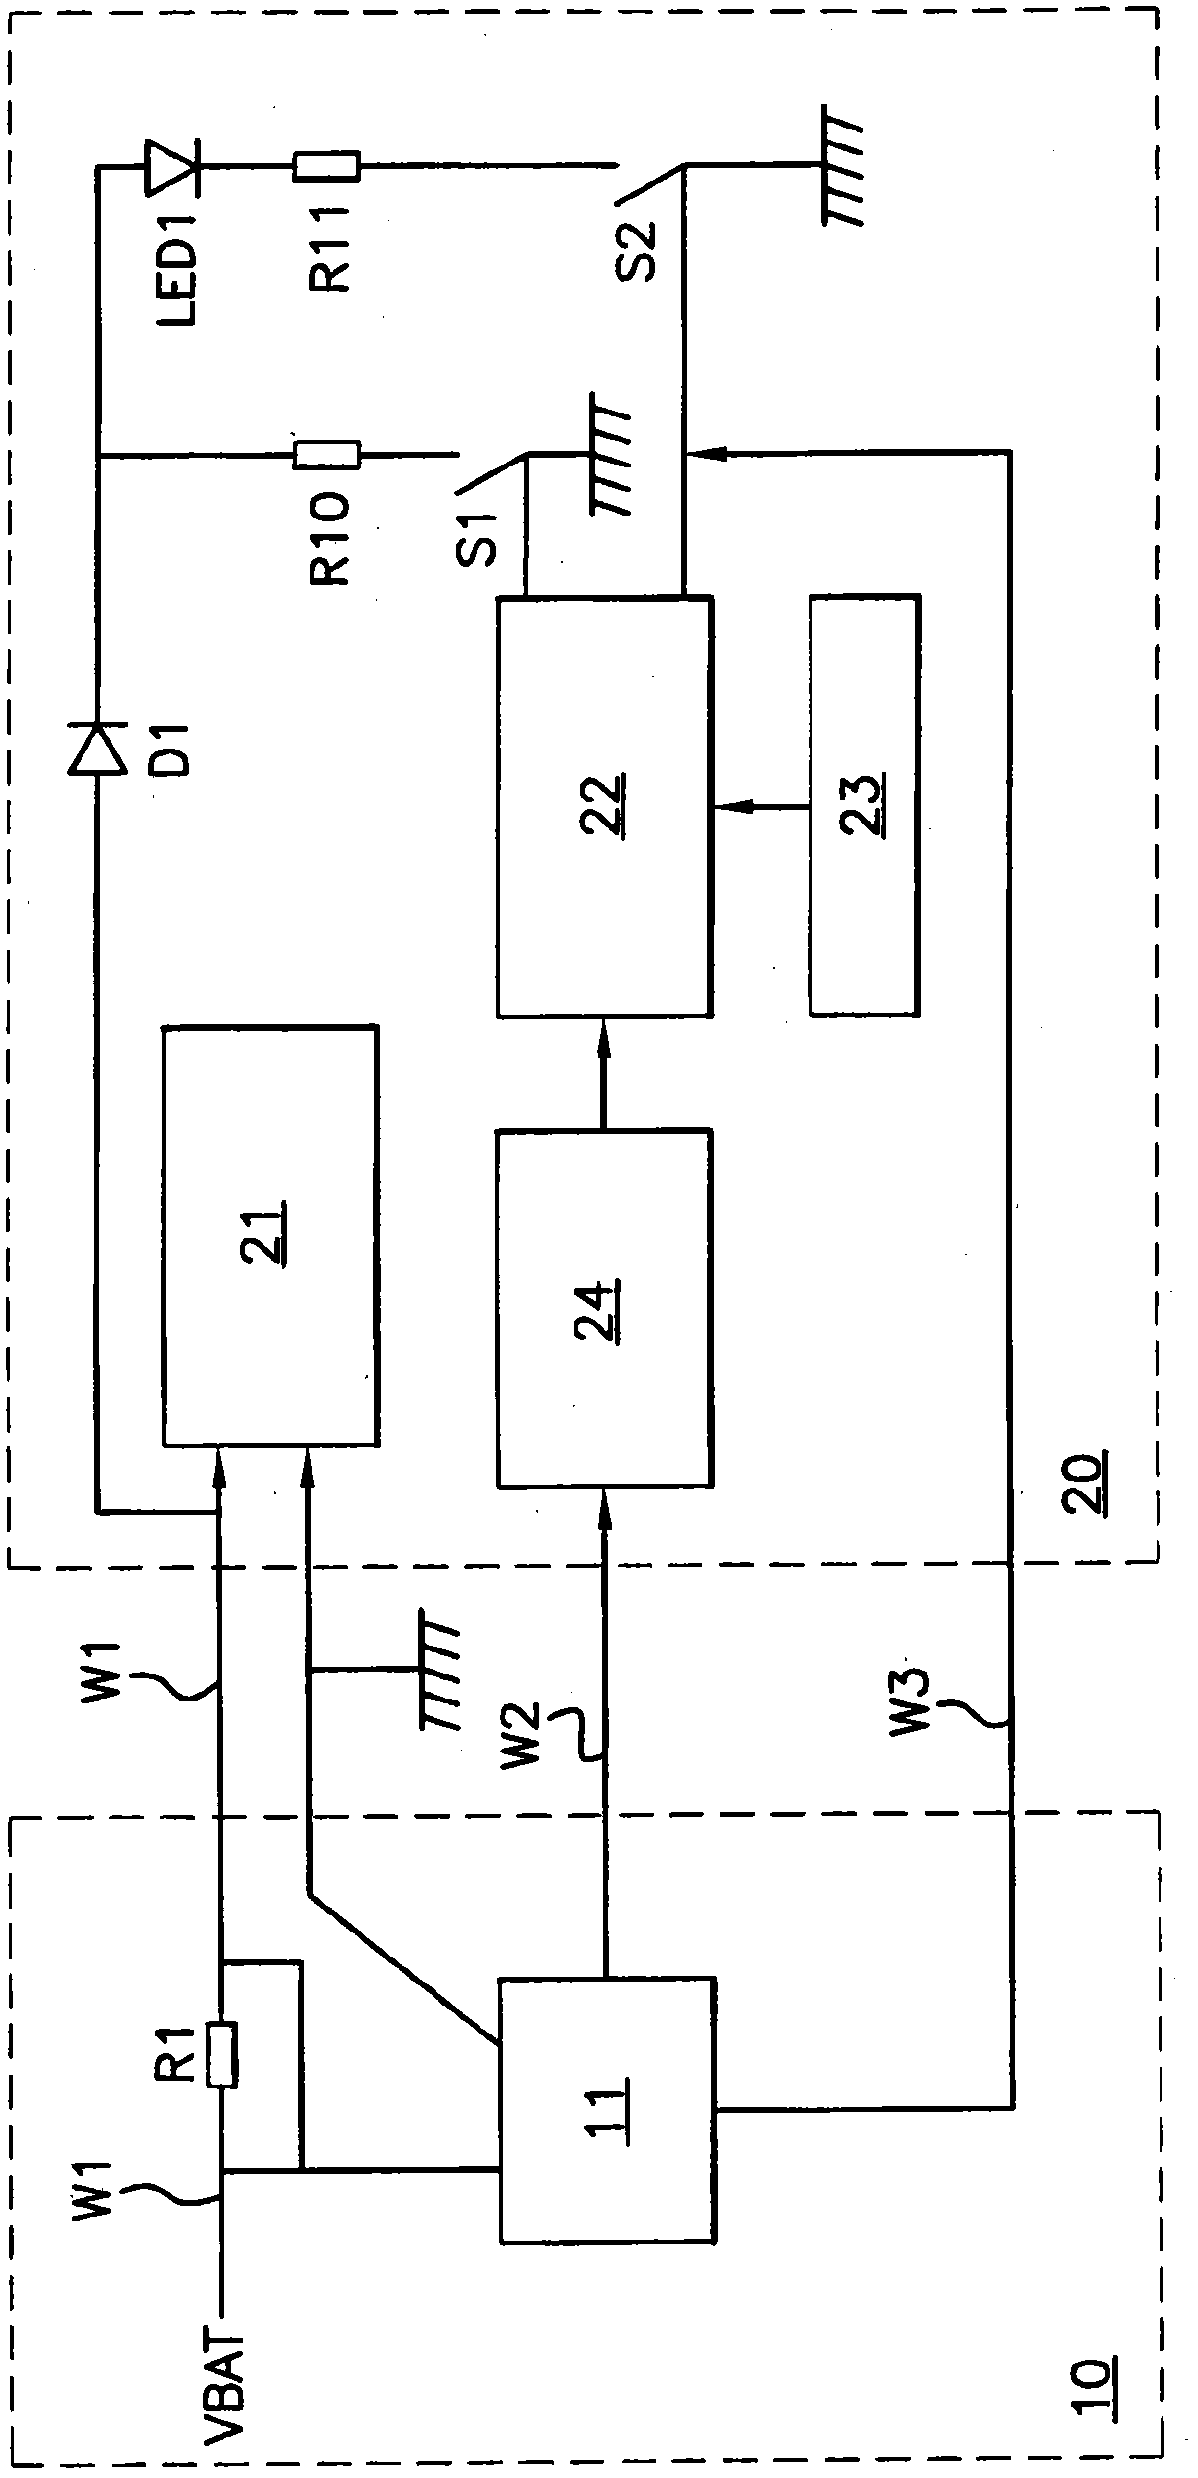 Device for communication between an electronic module and a sensor